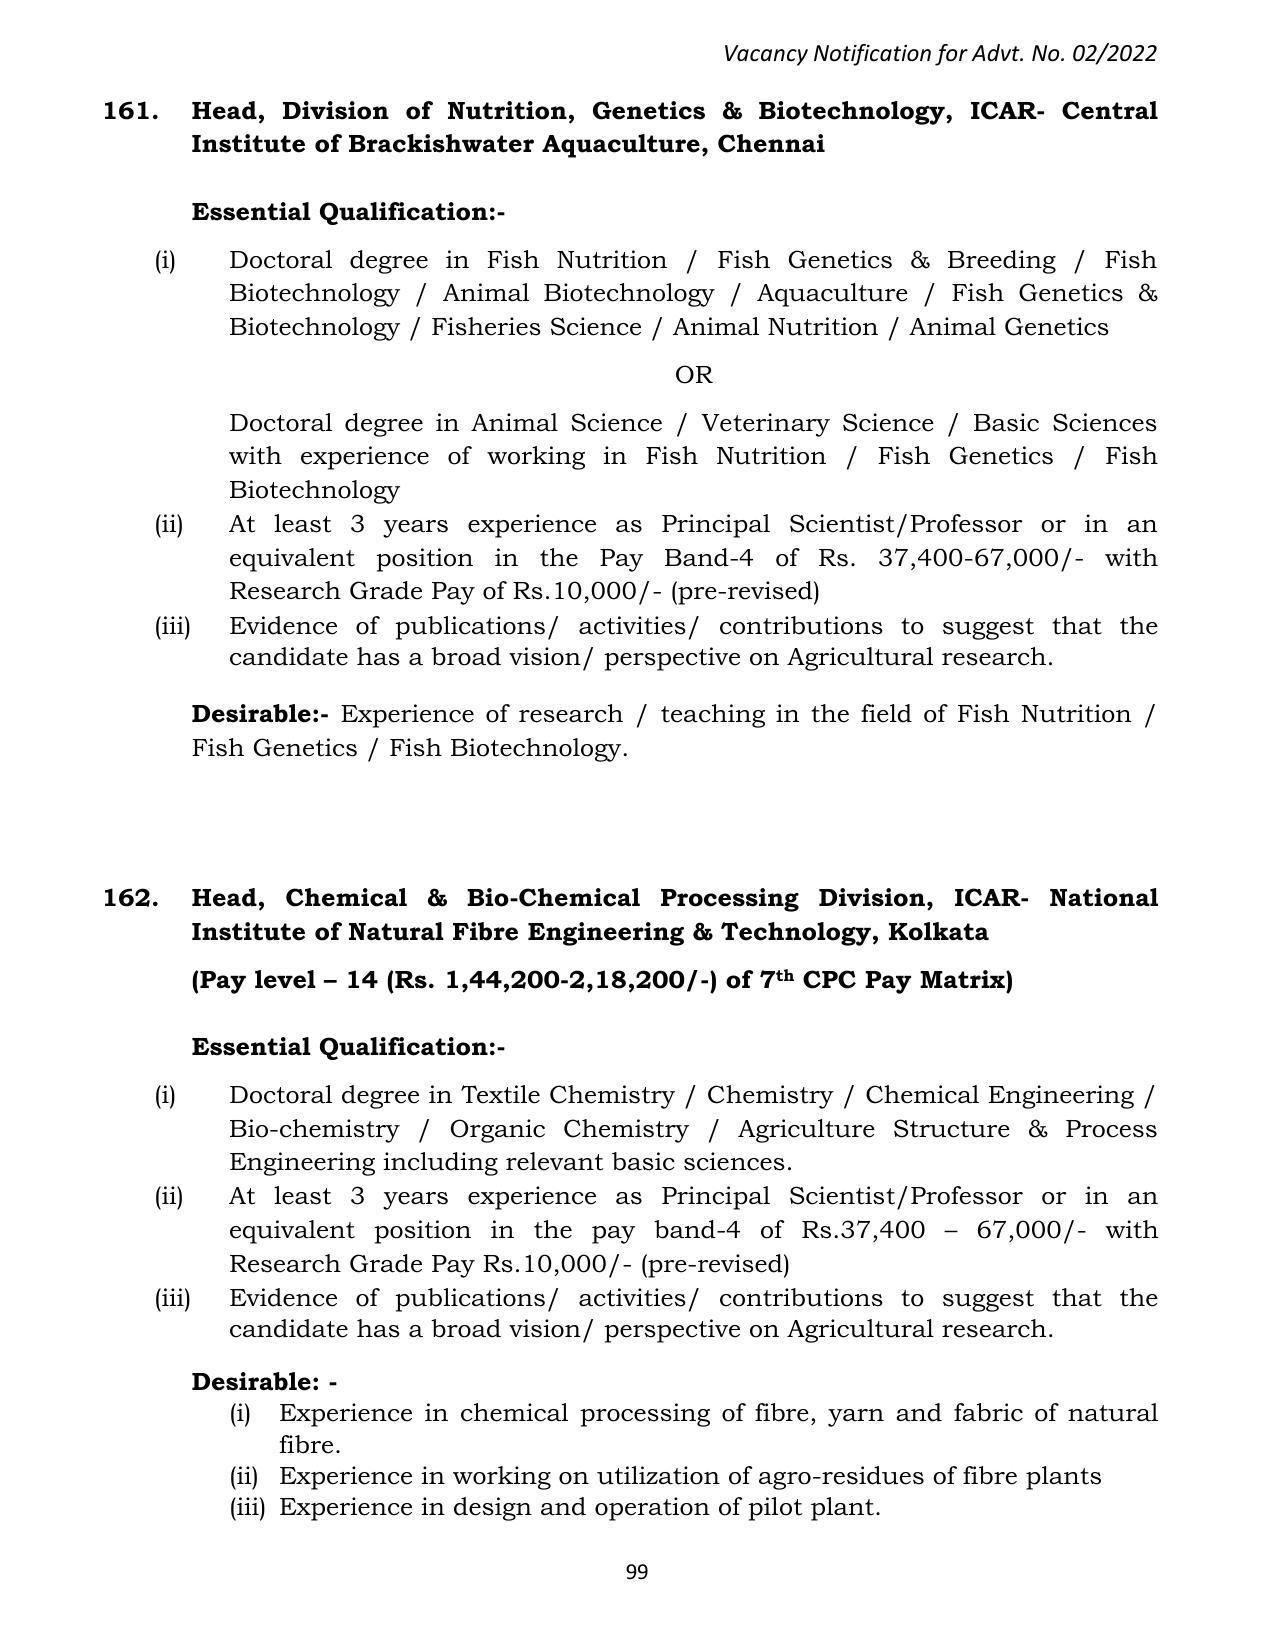 ASRB Non-Research Management Recruitment 2022 - Page 43